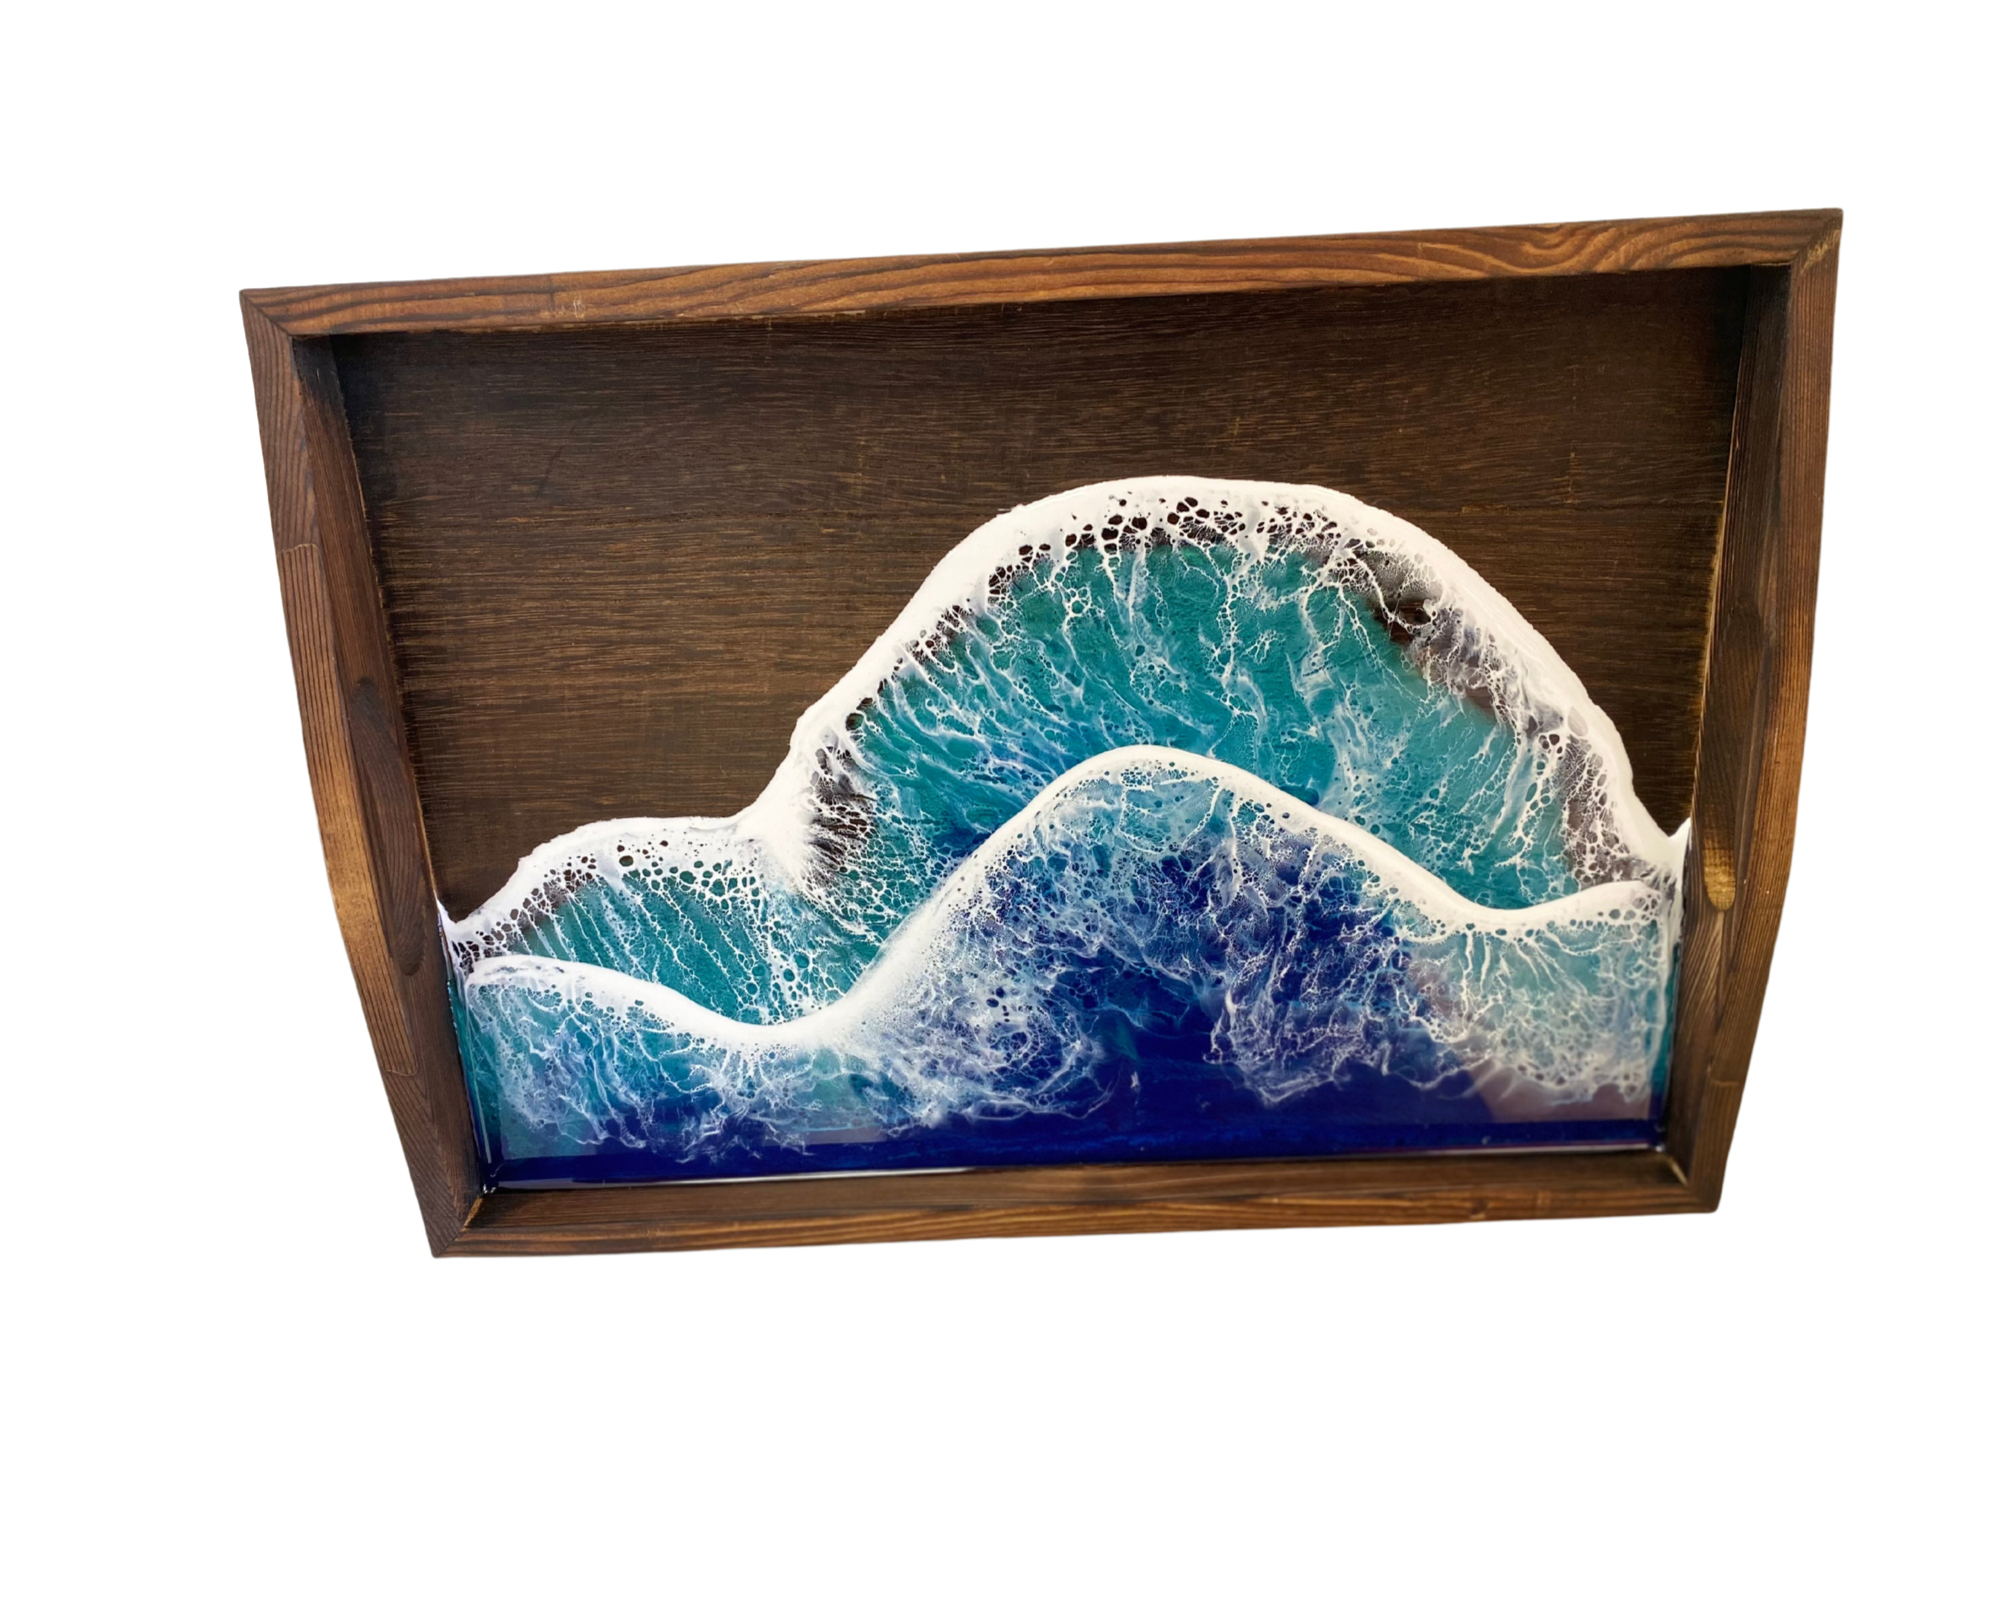 Rustic Resin Serving Tray Decorative Coastal Ocean Waves tray Serving tray with handles Personalized Tray perfect Christmas Gift - Tobmarc Home Decor & Gifts 